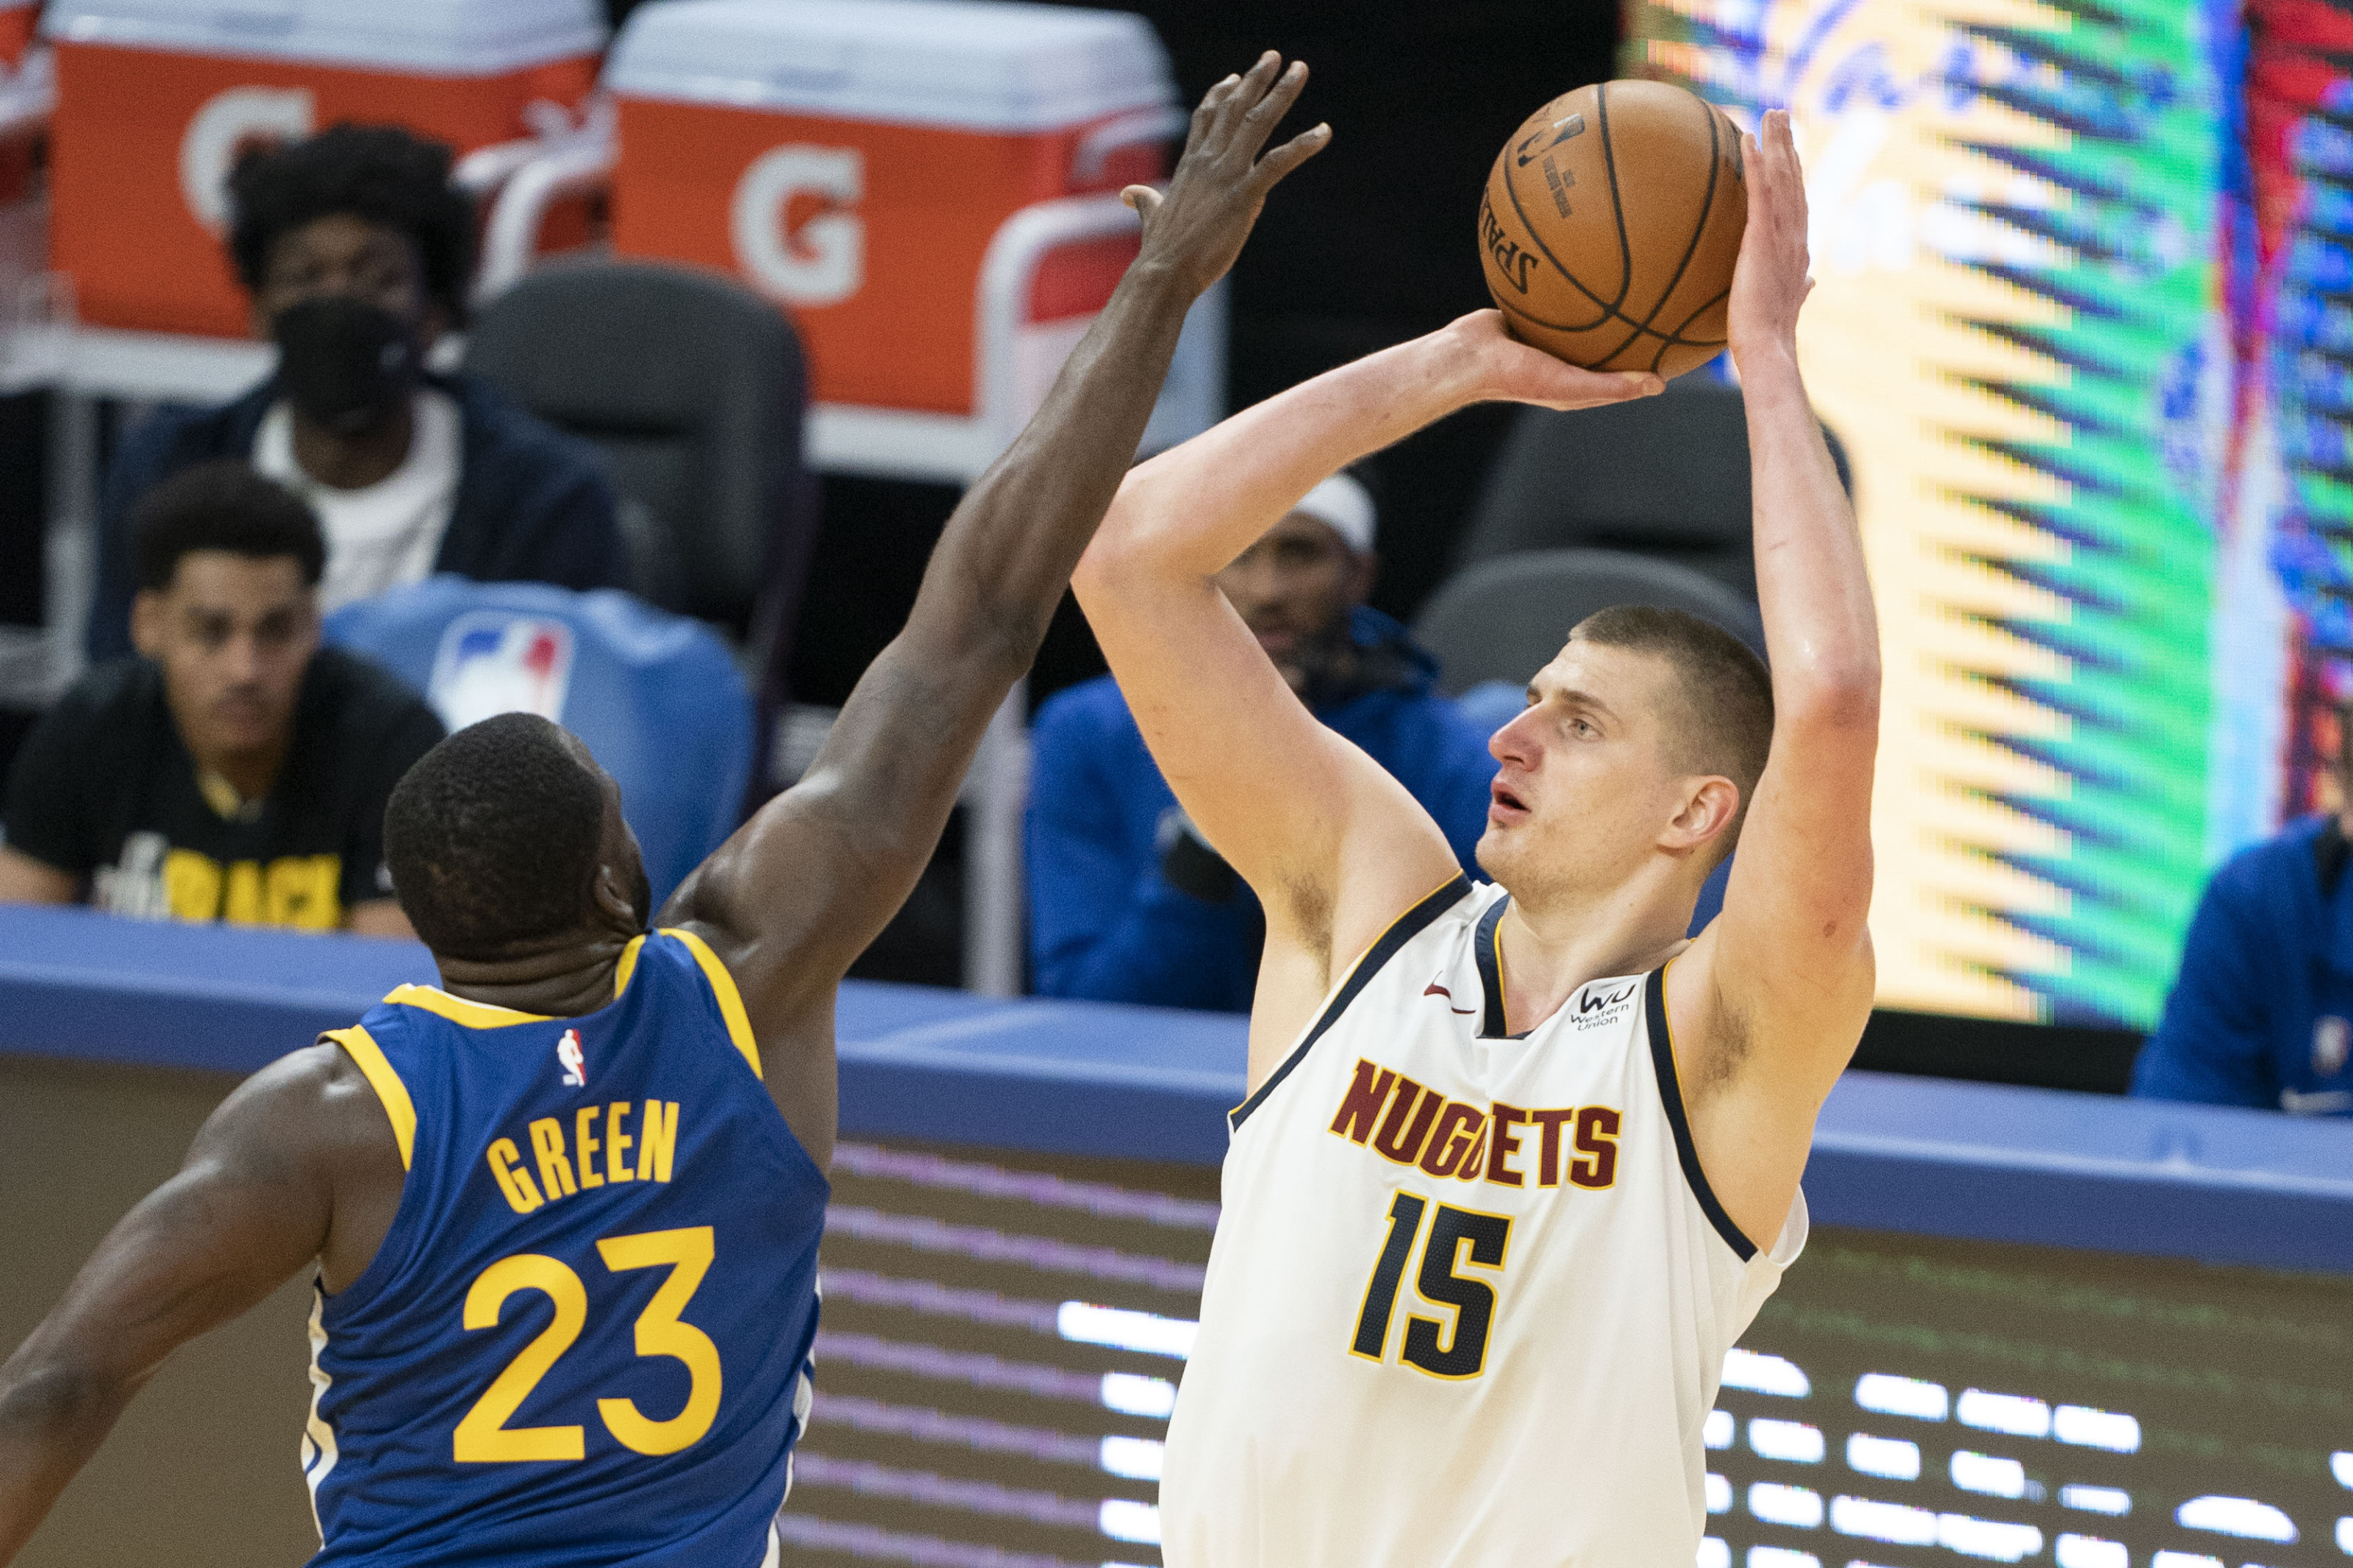 Draymond Green's moment with Nikola Jokić after shredding his defense on TV  - Basketball Network - Your daily dose of basketball